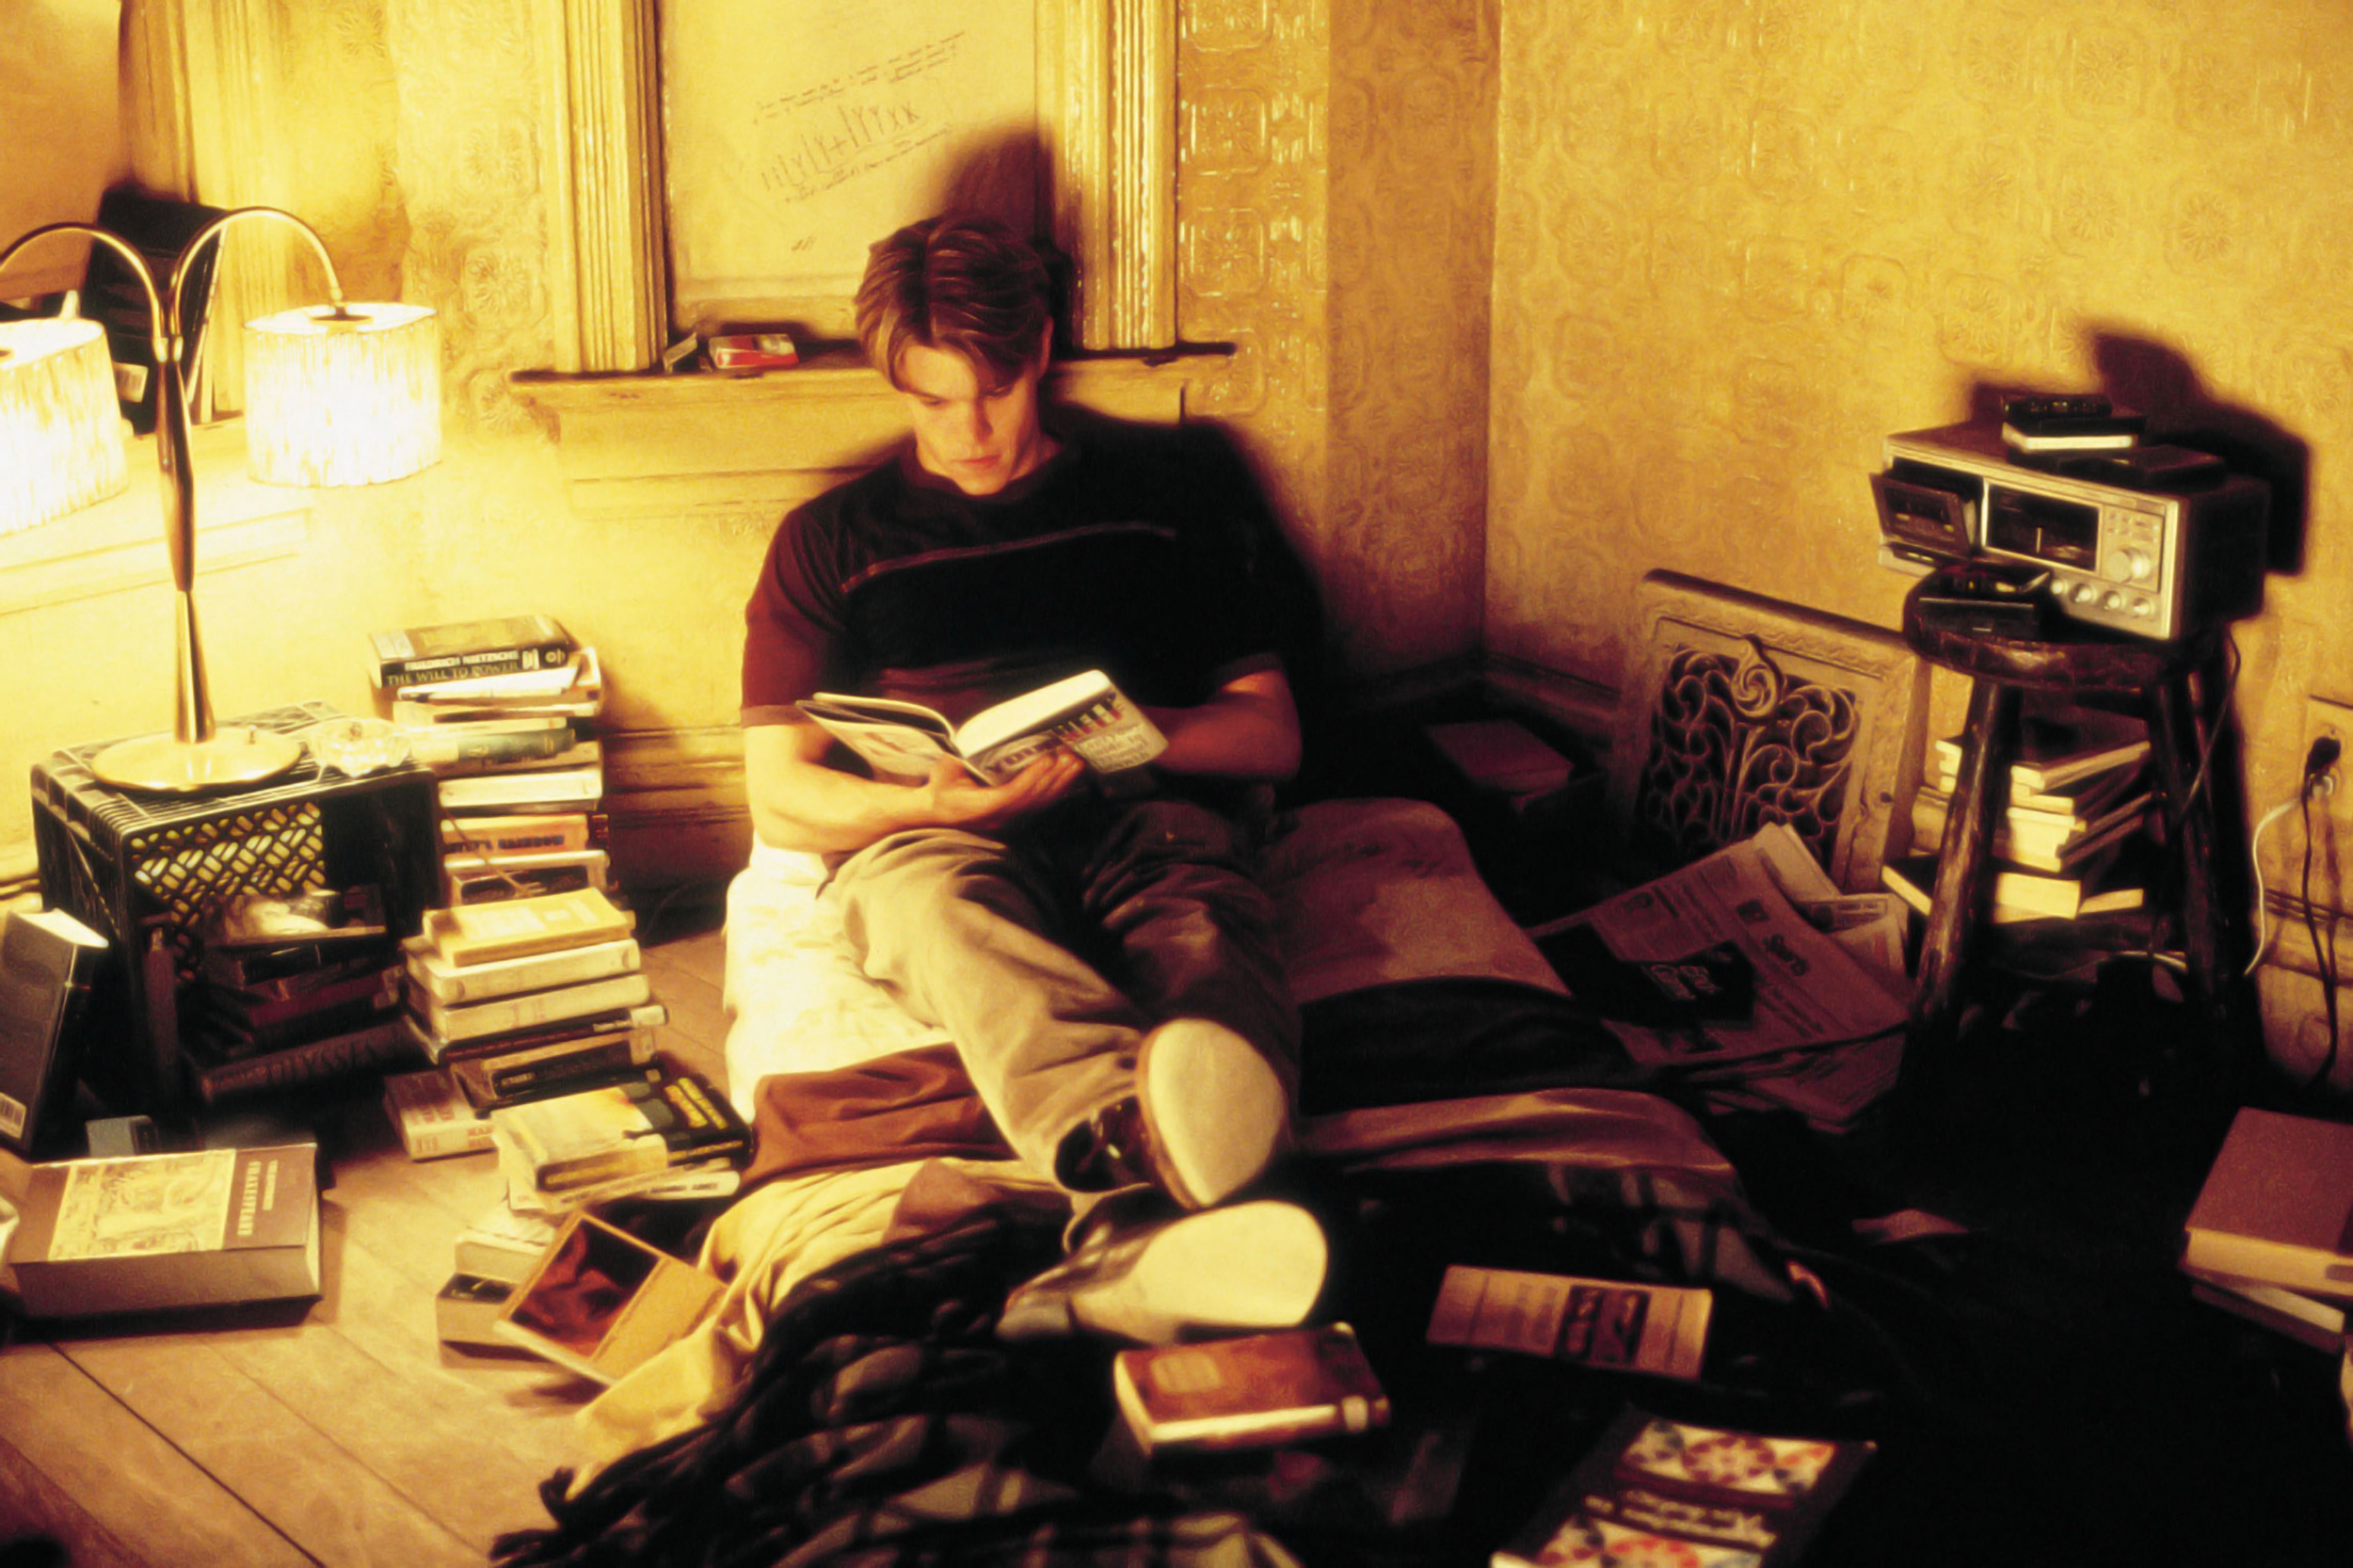 <p>Will Hunting is a fan of Howard Zinn’s book “People’s History of the United States.” He even tells Sean to read it. Weirdly enough, when Damon was a kid he and Zinn were actually neighbors, and Damon would later record a book-on-tape for “People’s History.”</p><p><a href='https://www.msn.com/en-us/community/channel/vid-cj9pqbr0vn9in2b6ddcd8sfgpfq6x6utp44fssrv6mc2gtybw0us'>Follow us on MSN to see more of our exclusive entertainment content.</a></p>